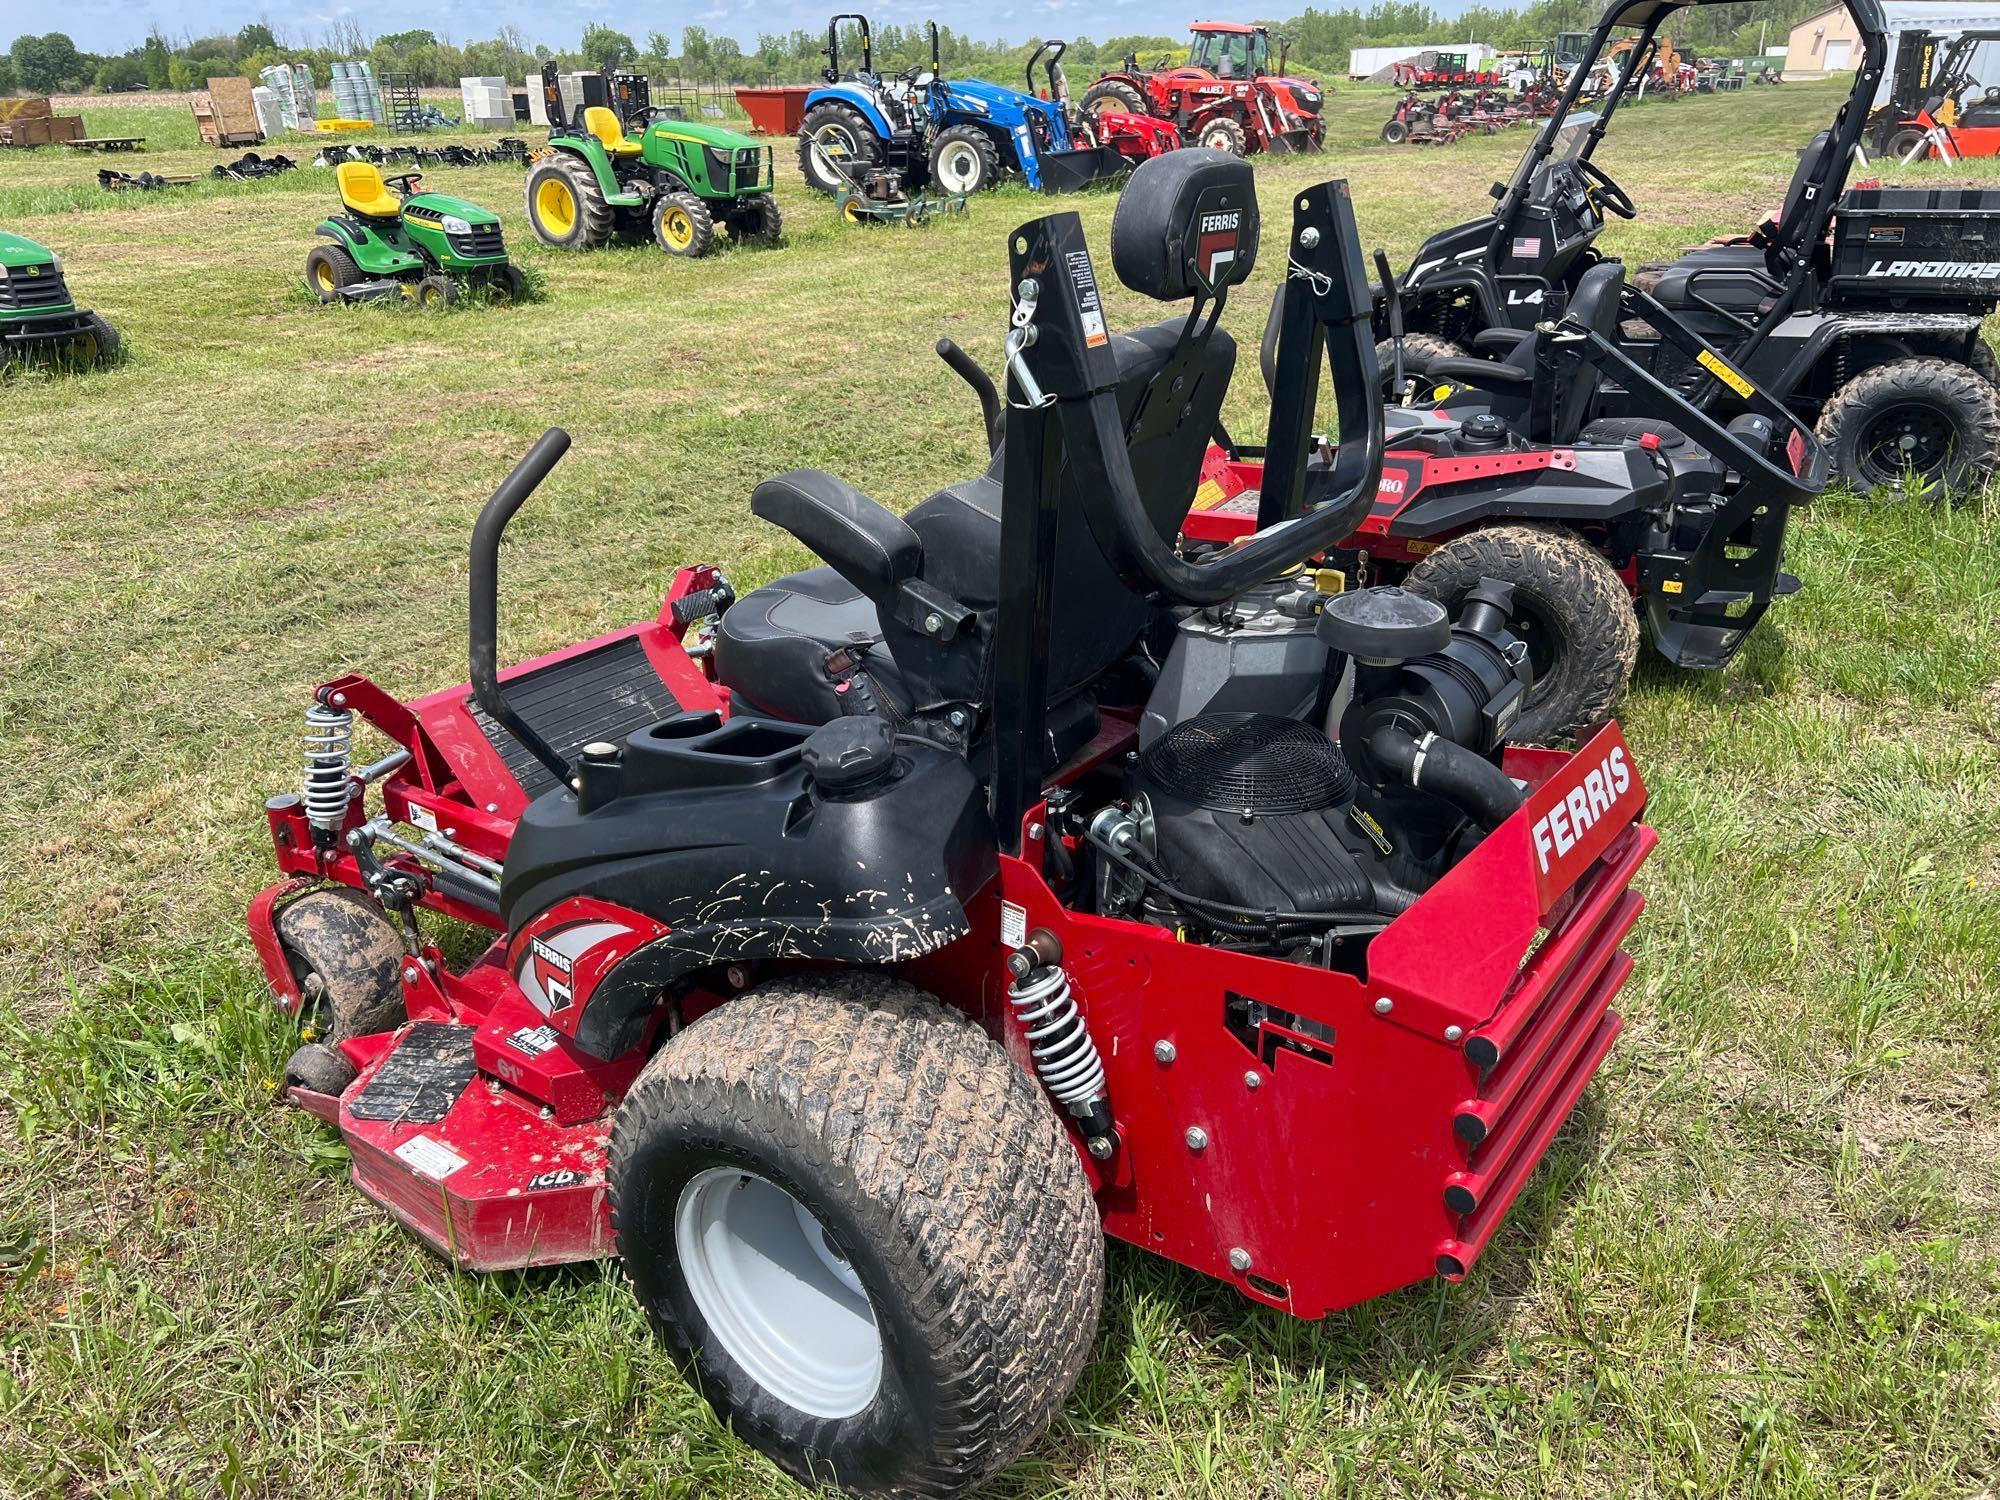 FERRIS ISX3300 COMMERCIAL MOWER SN-87575 powered by Vangaurd EFI37 gas engine, equipped with ROPS,